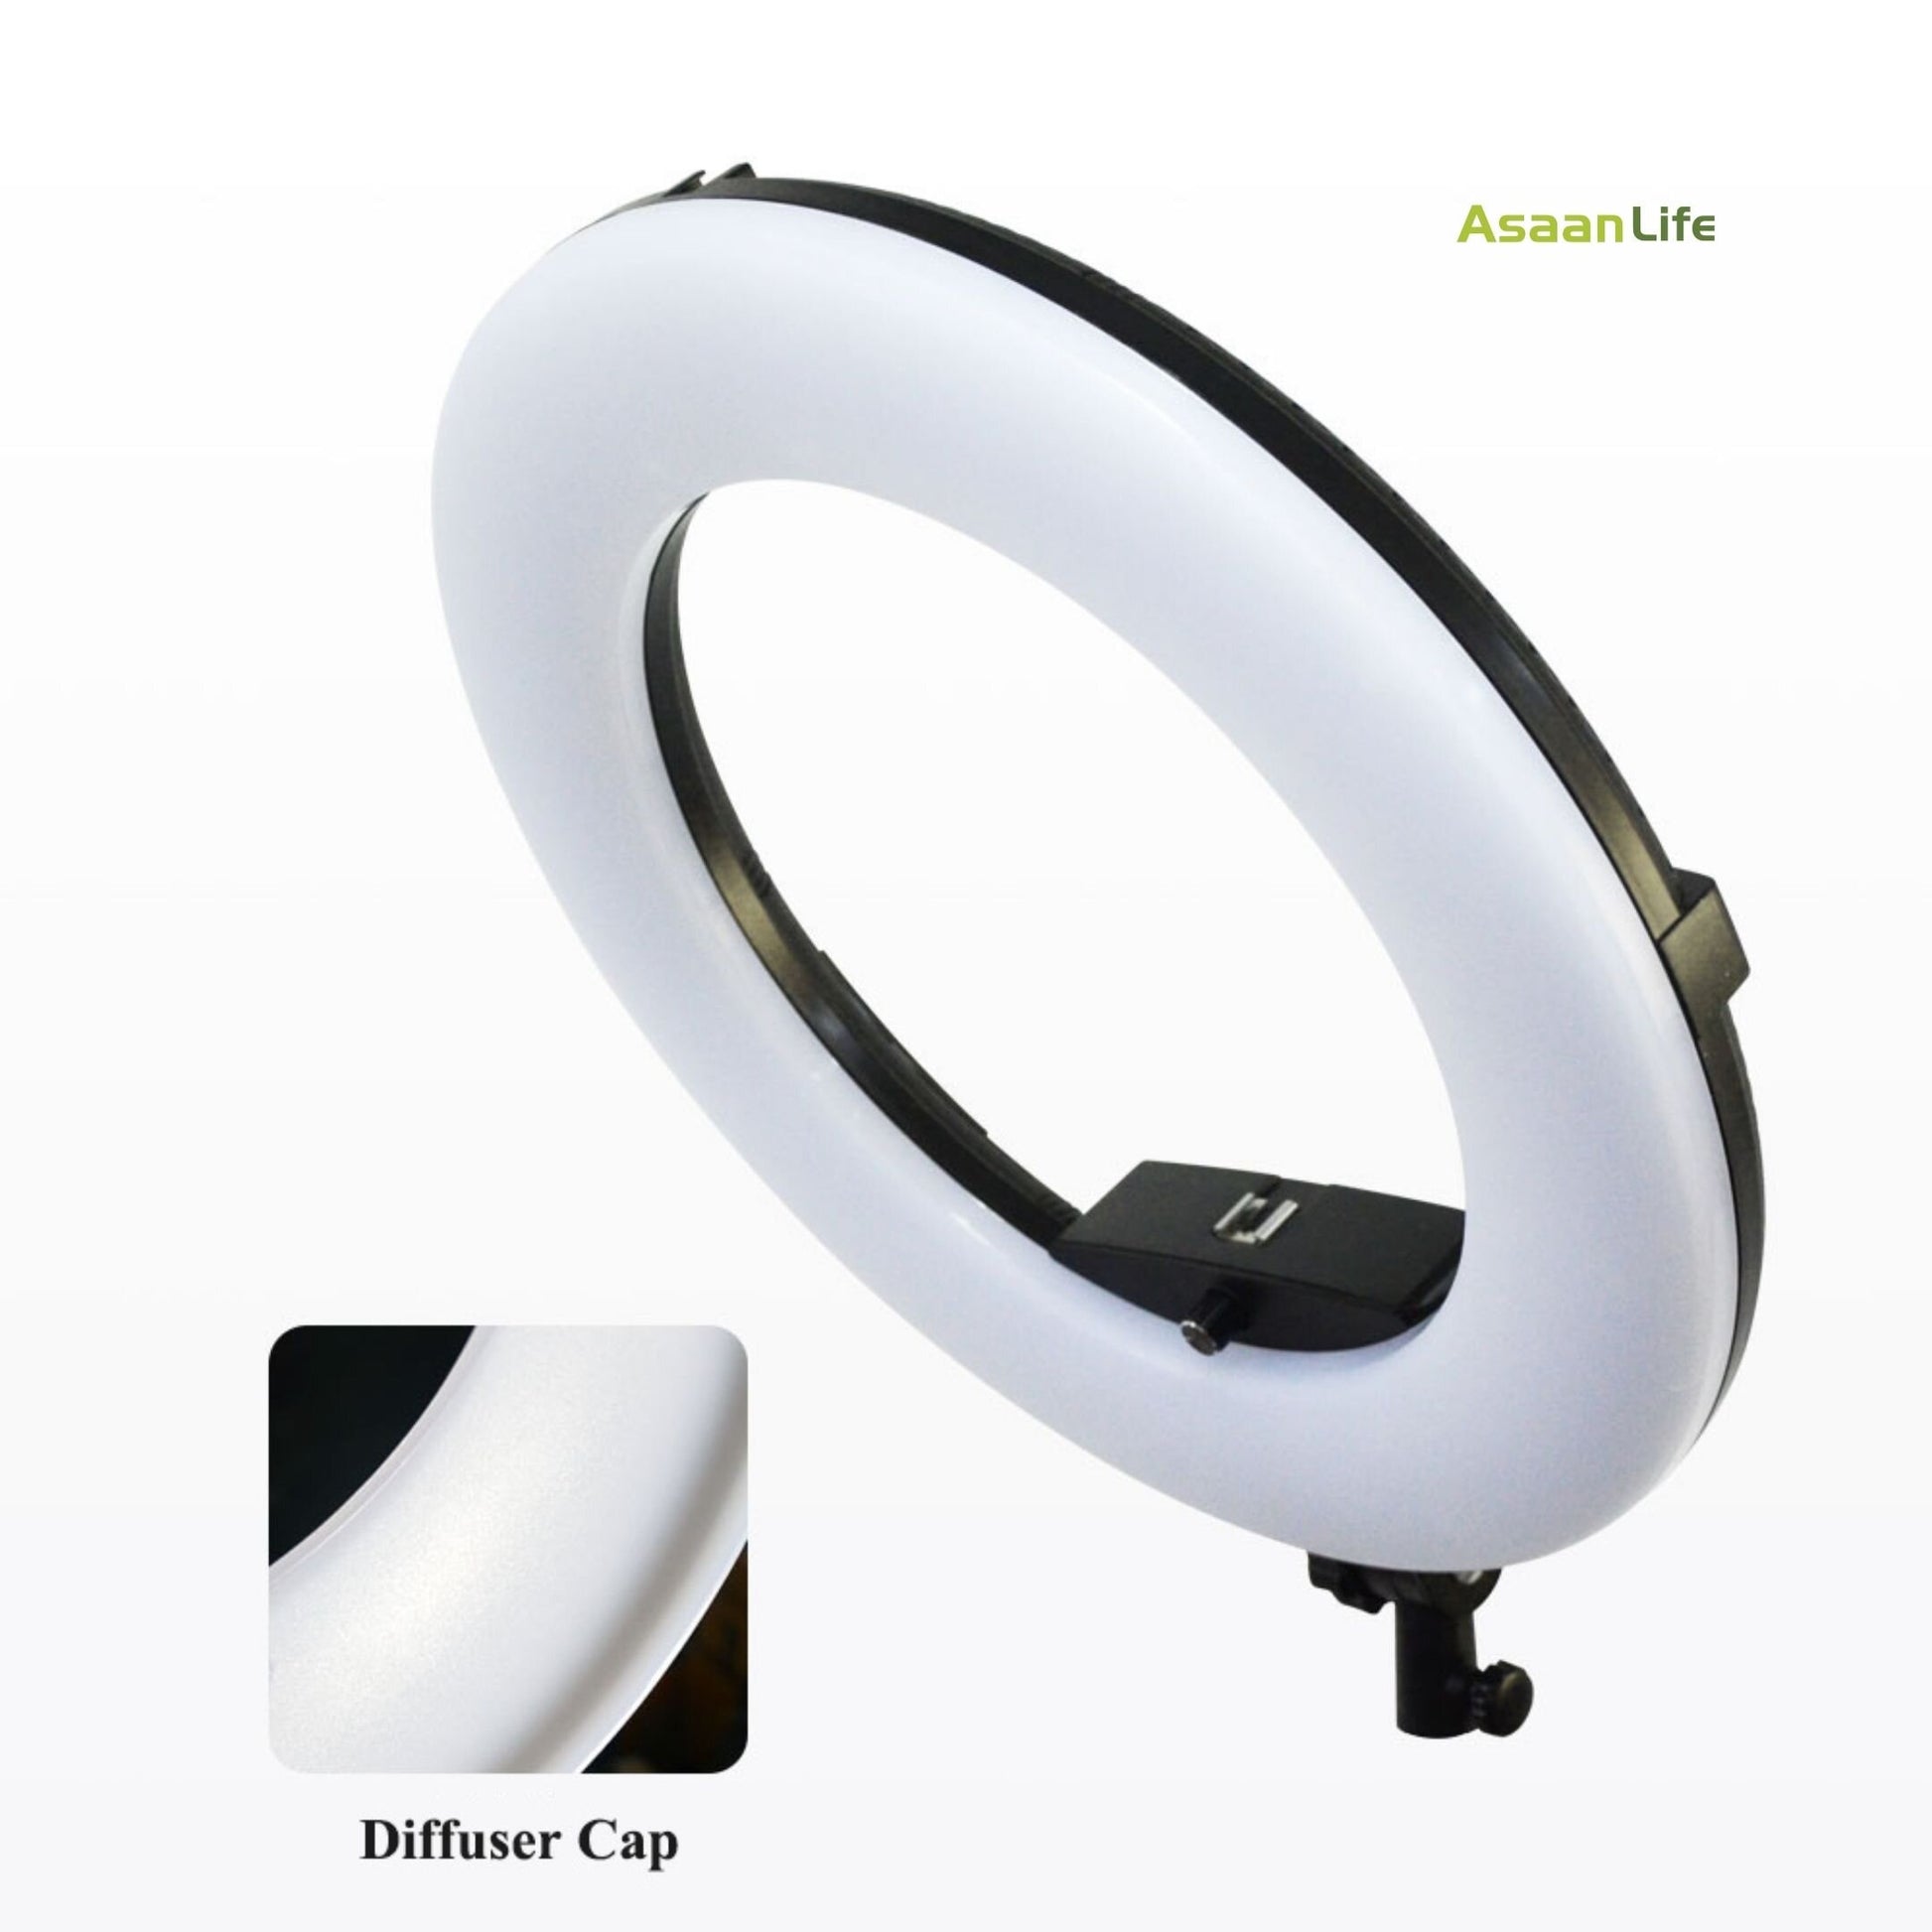 Portable 26cm Dimmable Selfie Ring Light with Remote Control for Studio Photography, Video Calls, Vlogging, Live Streaming, Makeup and All Occasions